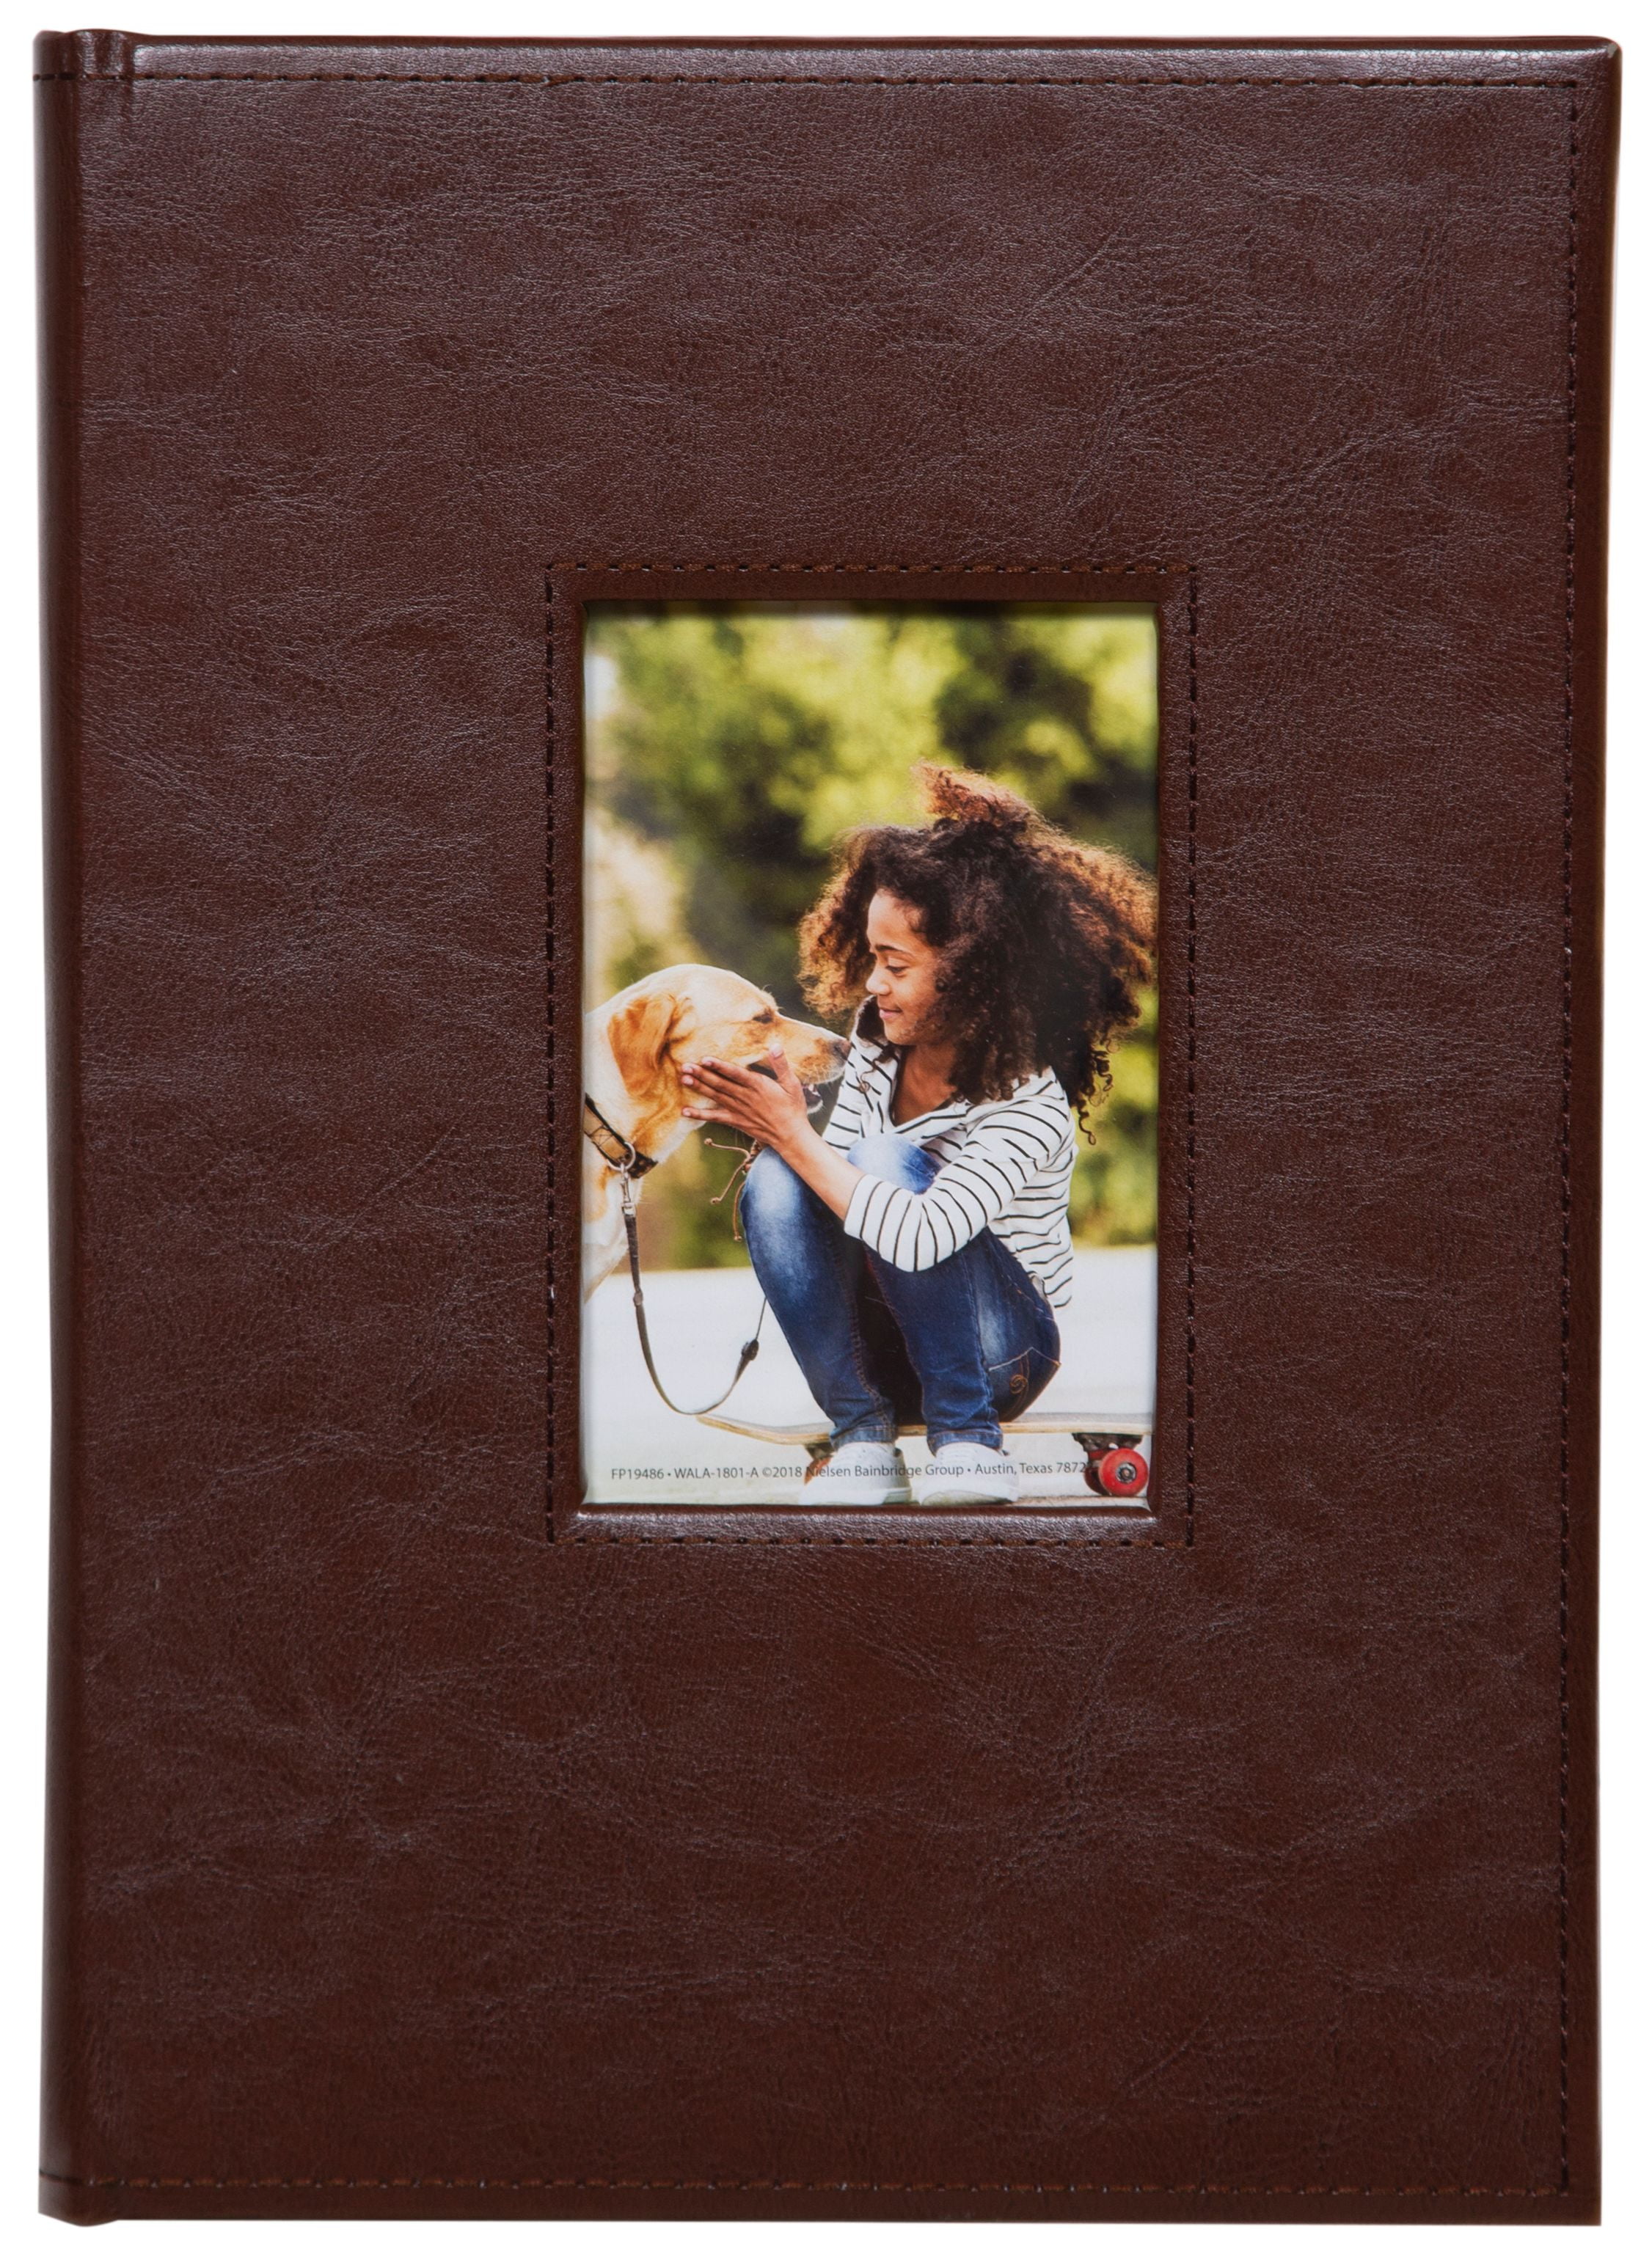 Gallery Leather Compact Photo Album with Window - 9.25x8.0